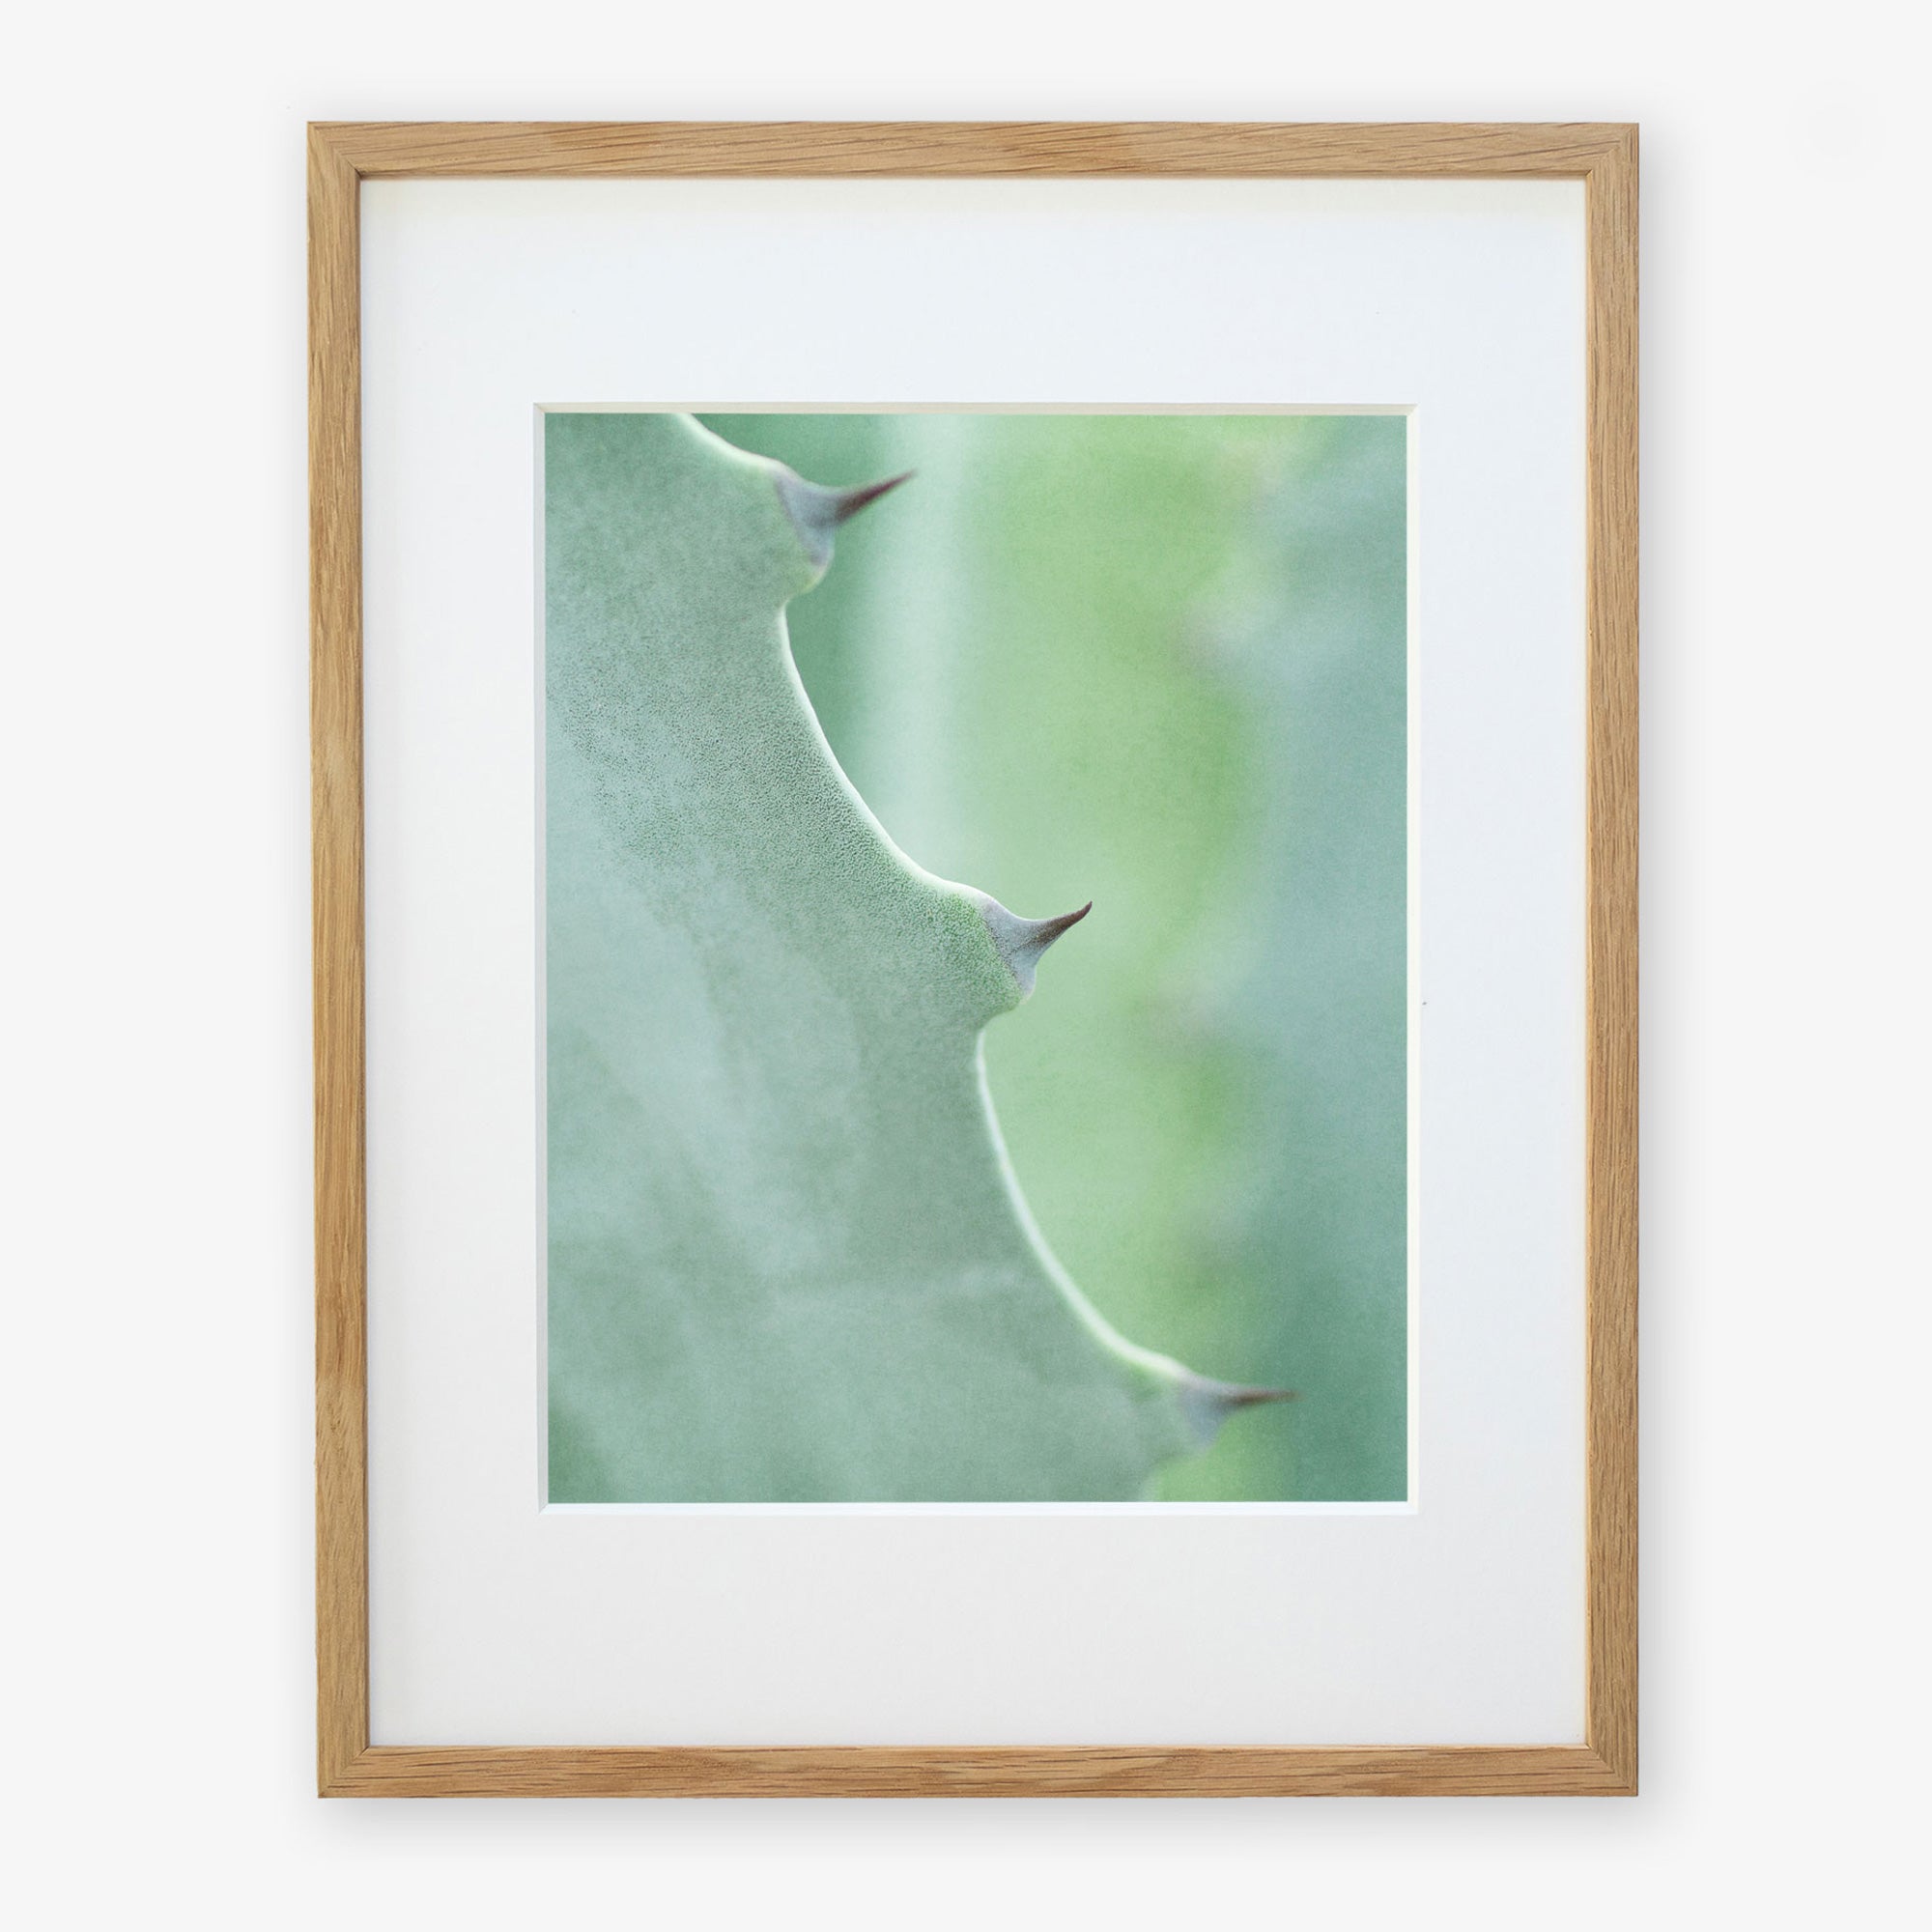 A close-up photo of an Offley Green &#39;Aloe Vera Spikes II&#39; print, focusing on its green surface and sharp thorns, printed on archival photographic paper against a white background.